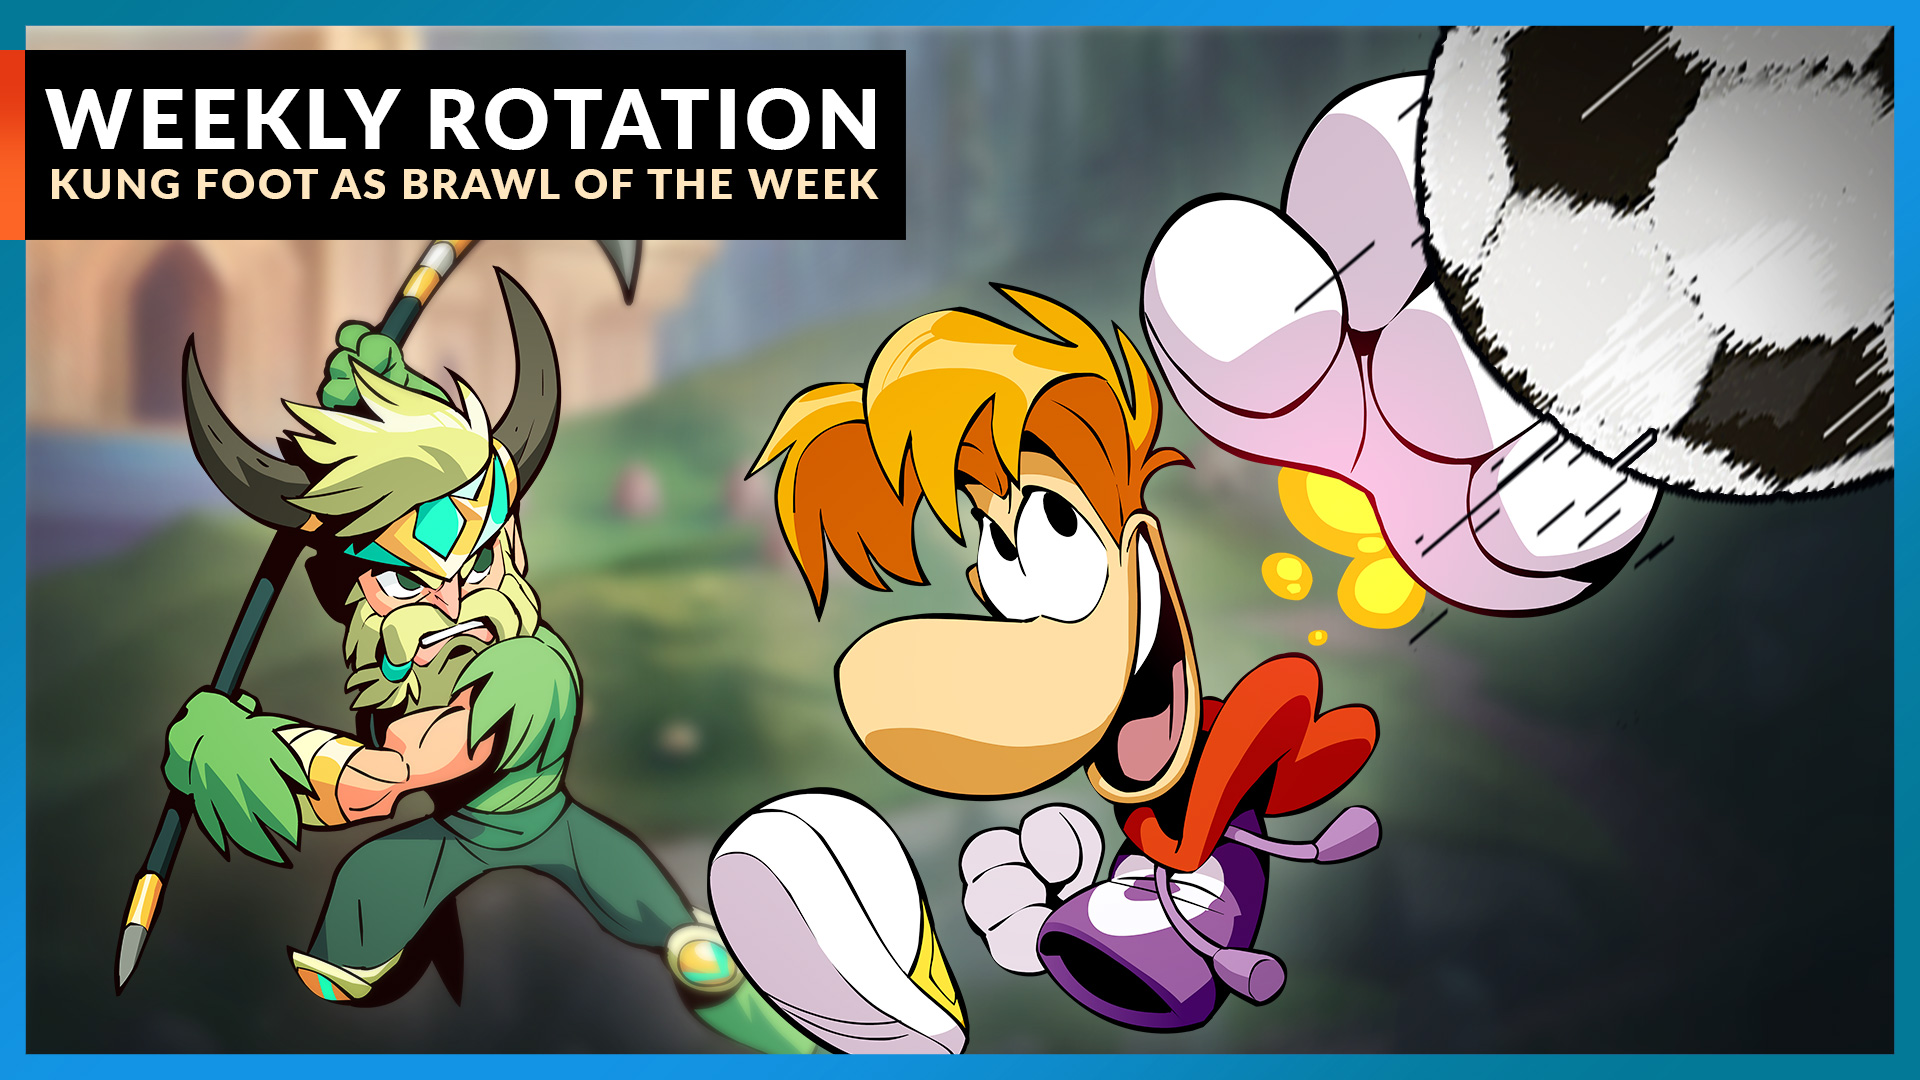 Kung Foot Featured for Brawl of the Week!